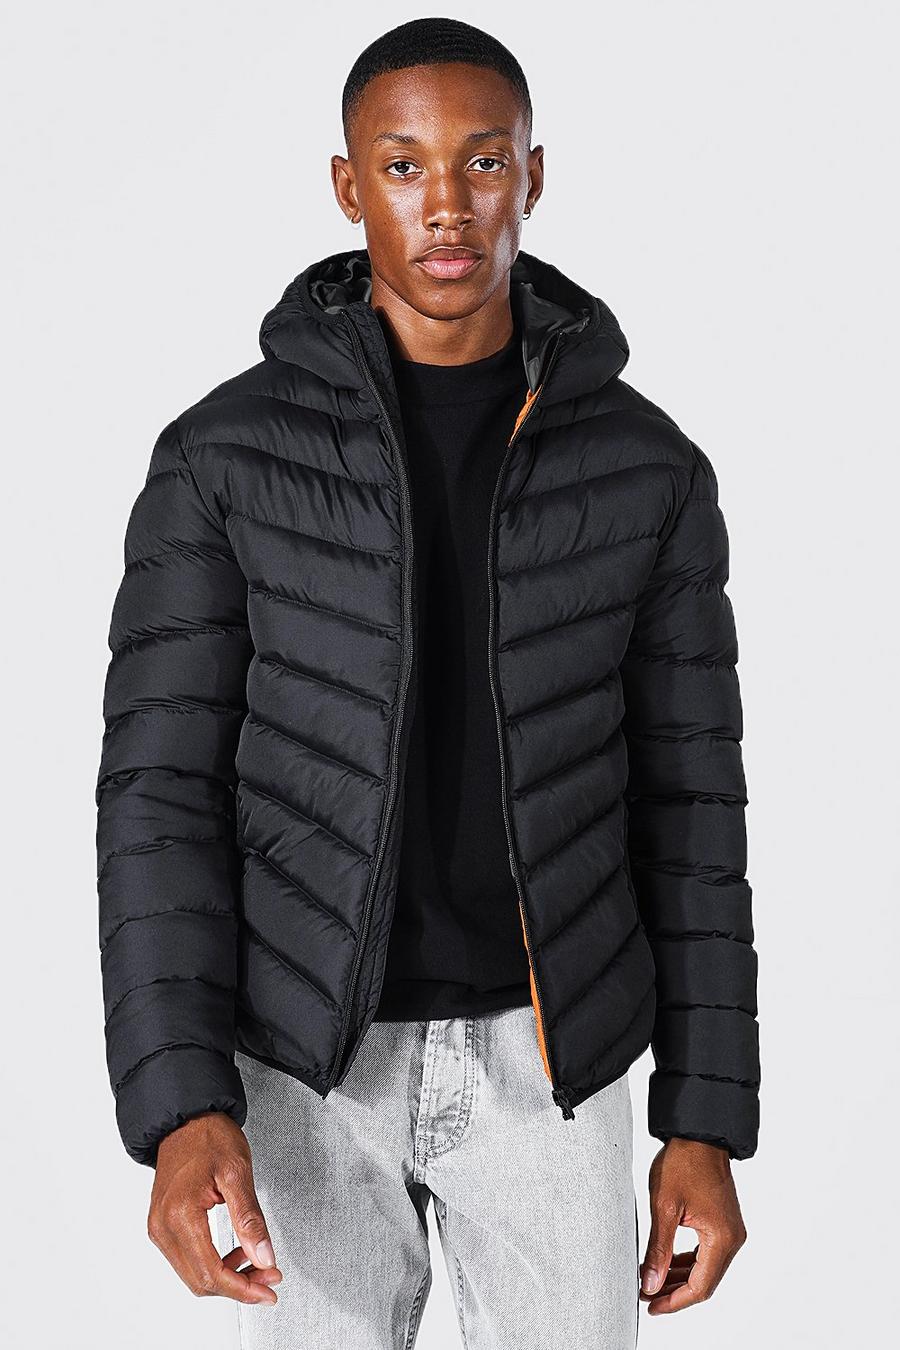 Black Quilted Zip Through Jacket With Hood